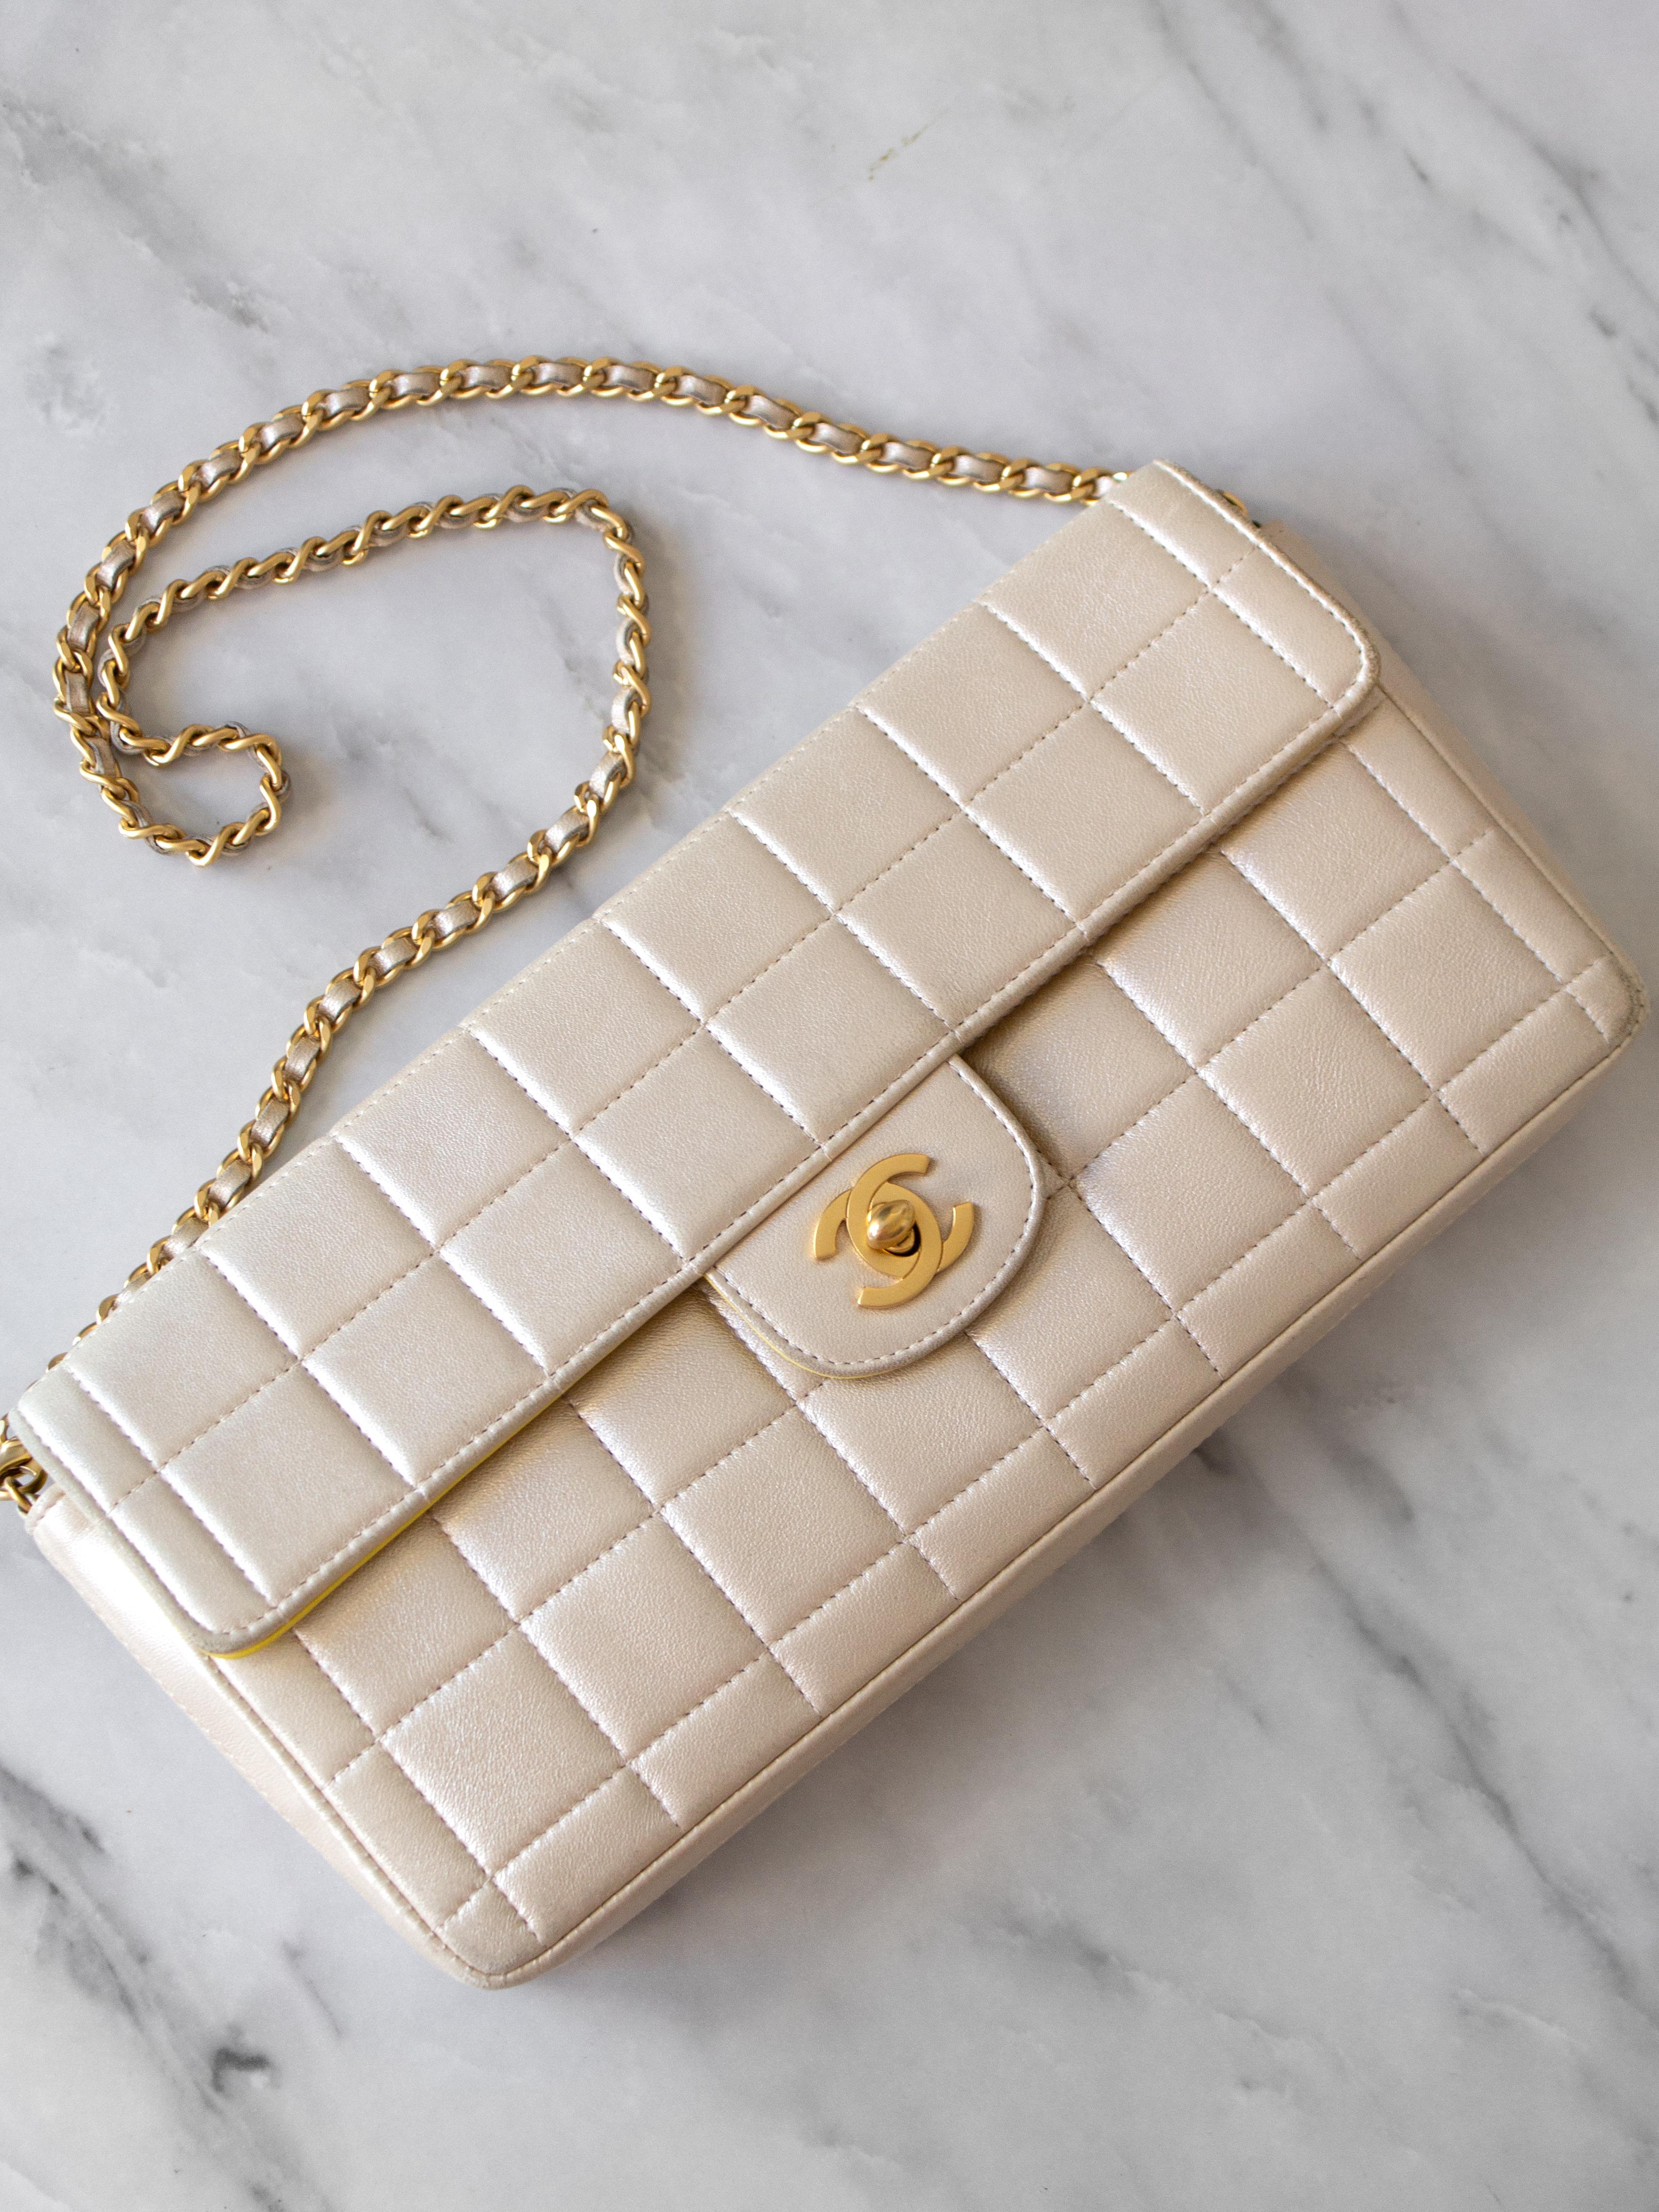 Chanel Vintage 2002 East West Chocolate Bar Metallic Champagne Pearly Gold Bag en vente 1